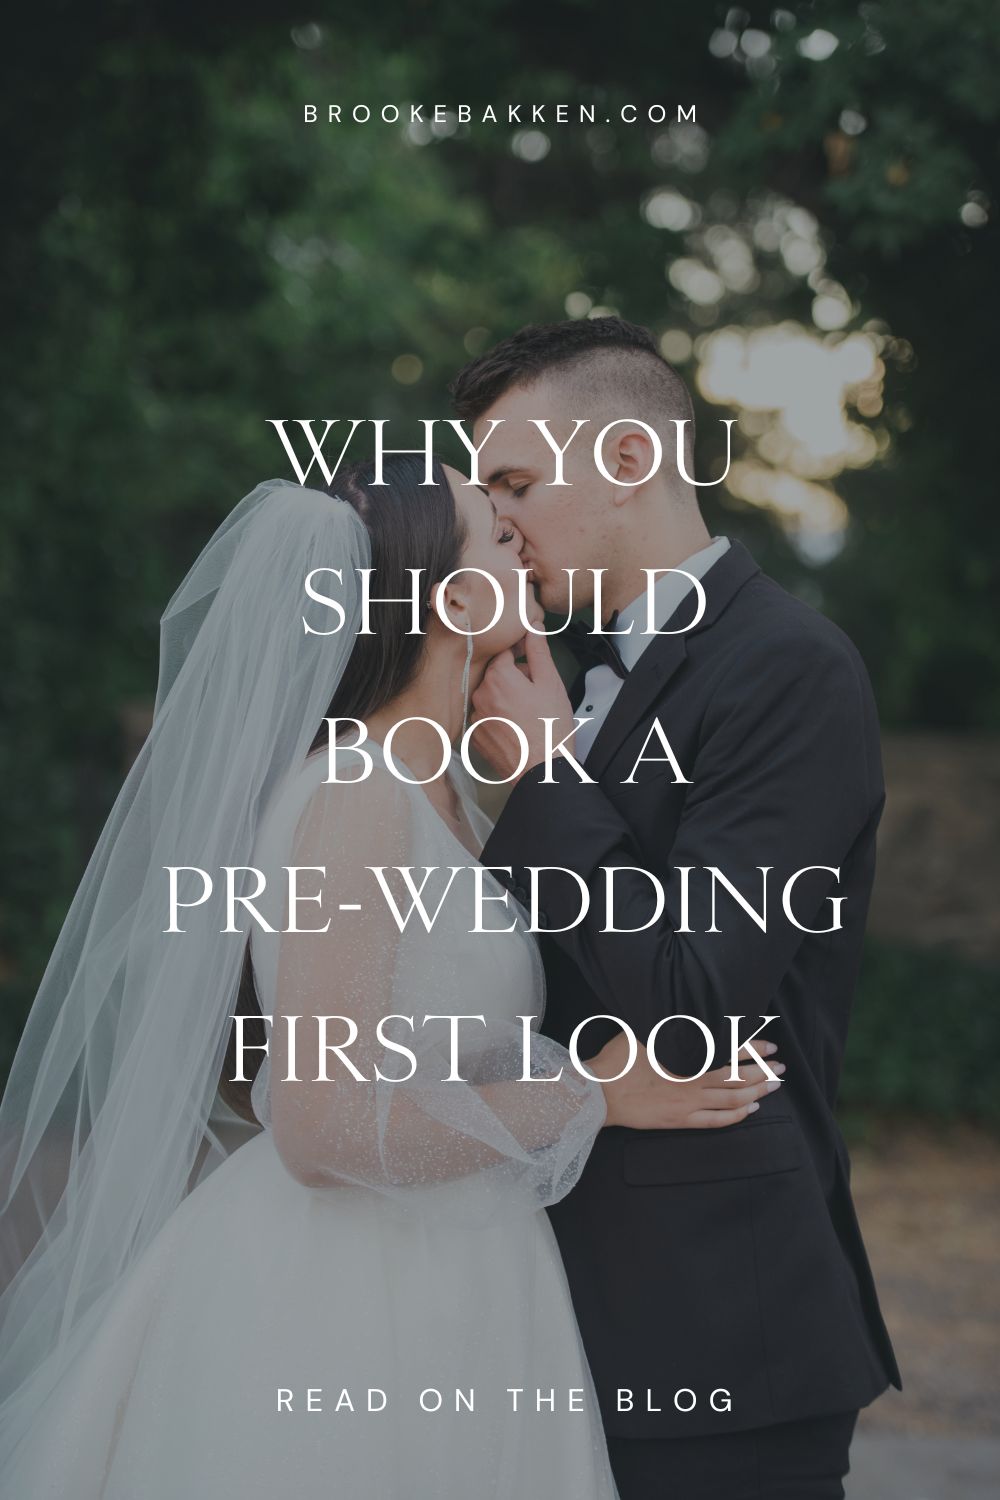 Pre-wedding first look pros